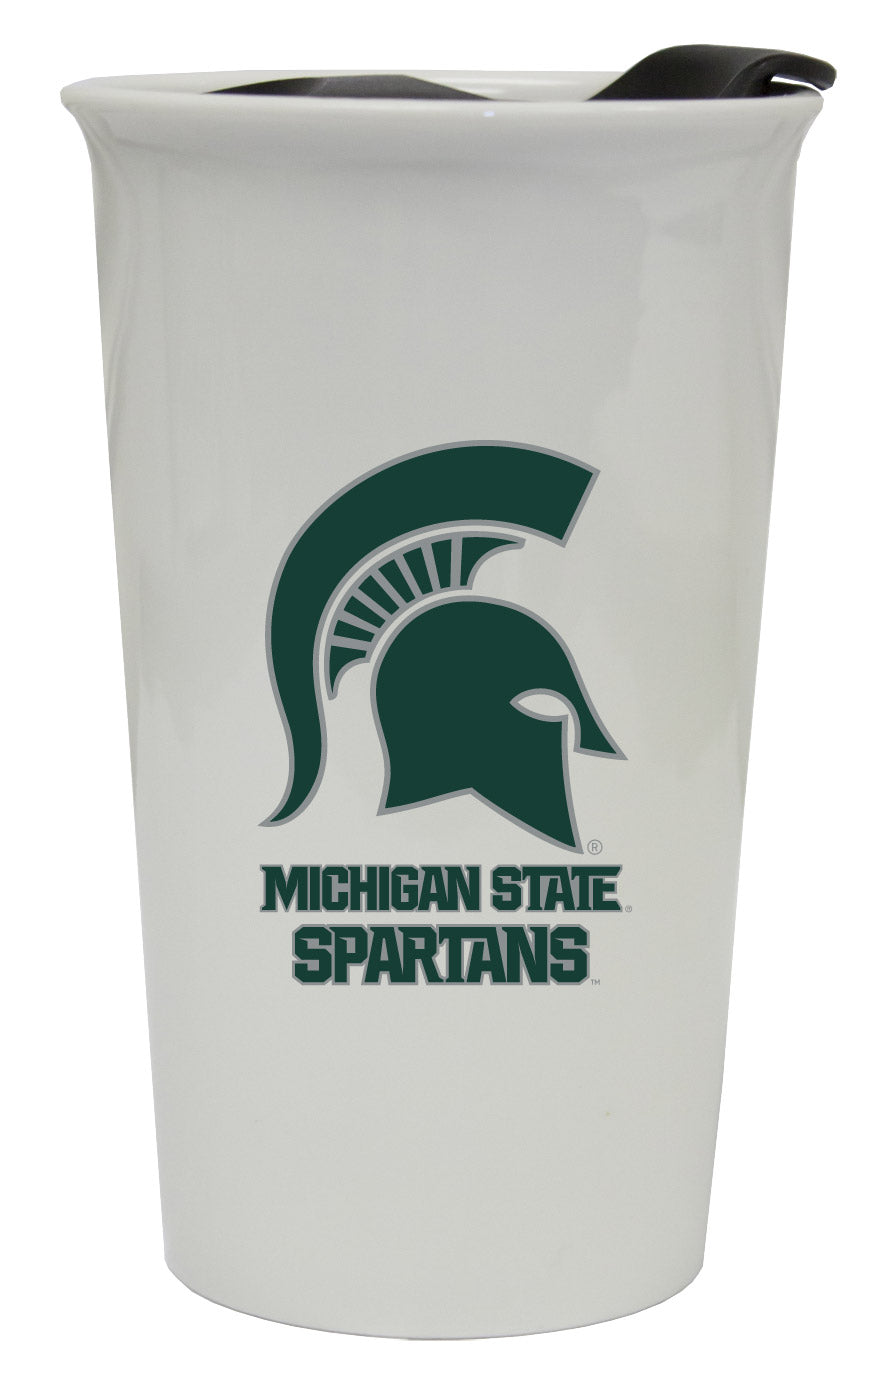 Michigan State Spartans Double Walled Ceramic Tumbler